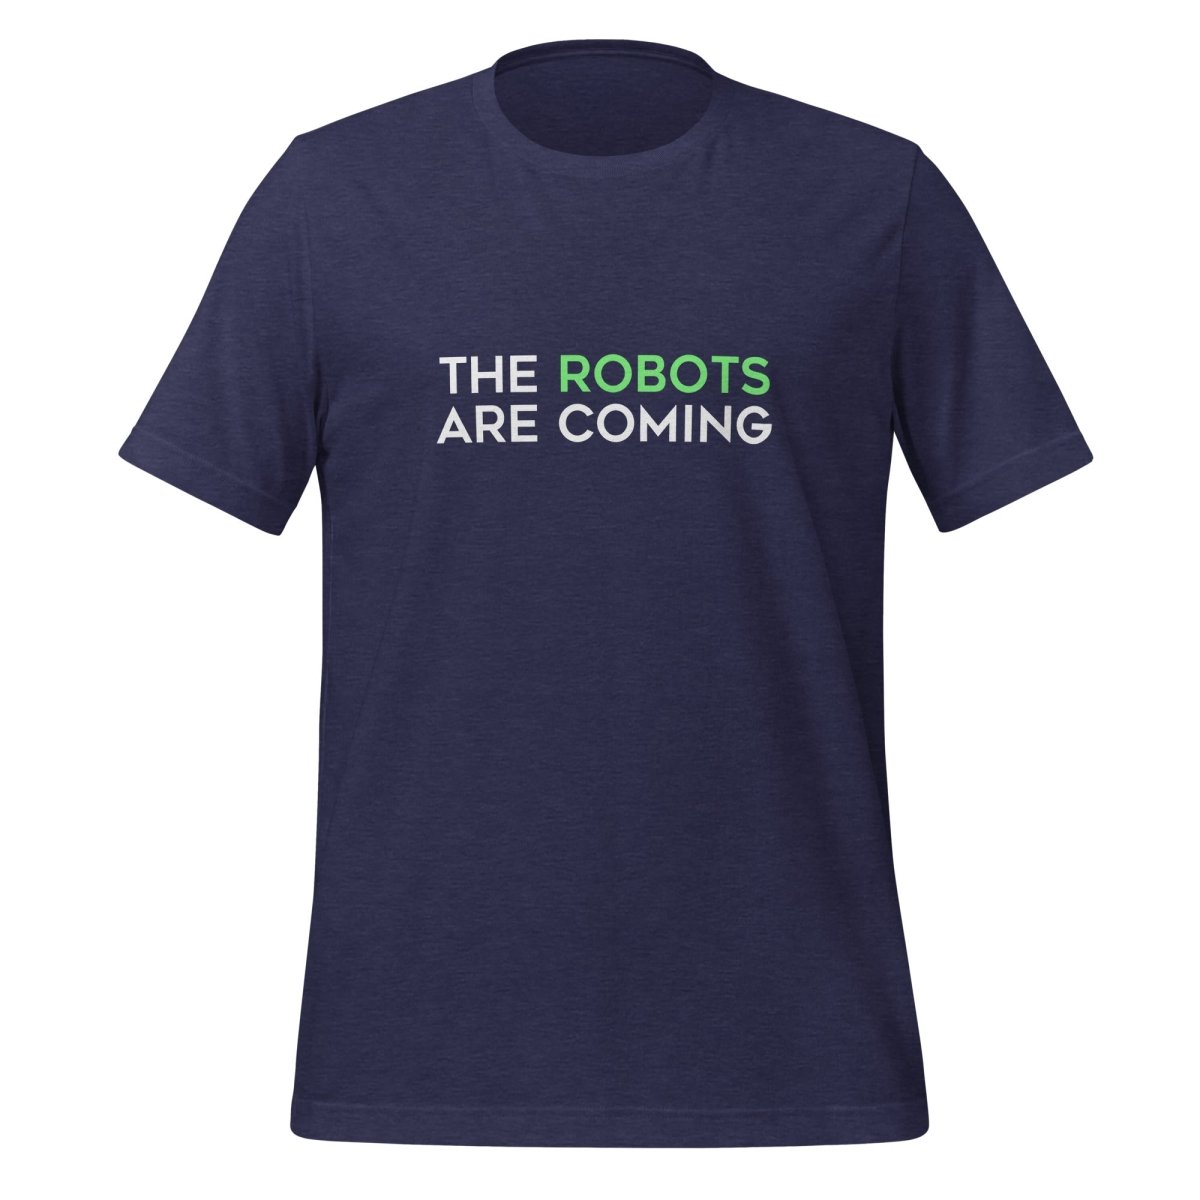 The Robots Are Coming (Green) T - Shirt 1 (unisex) - Heather Midnight Navy - AI Store